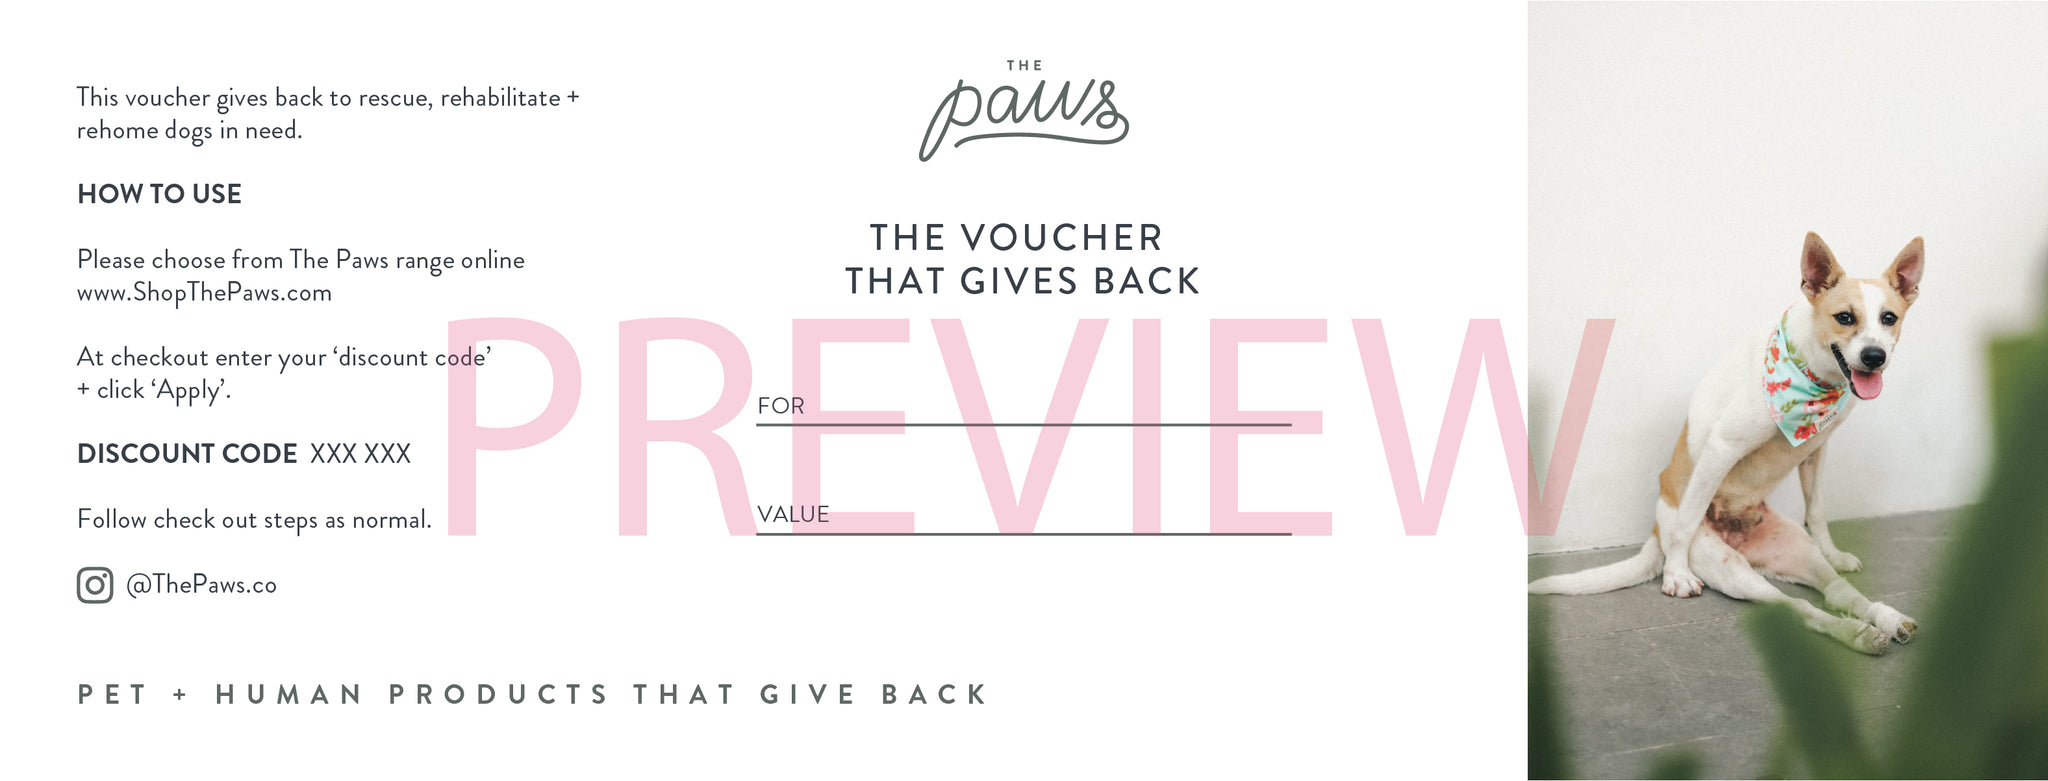 Vouchers that Give Back